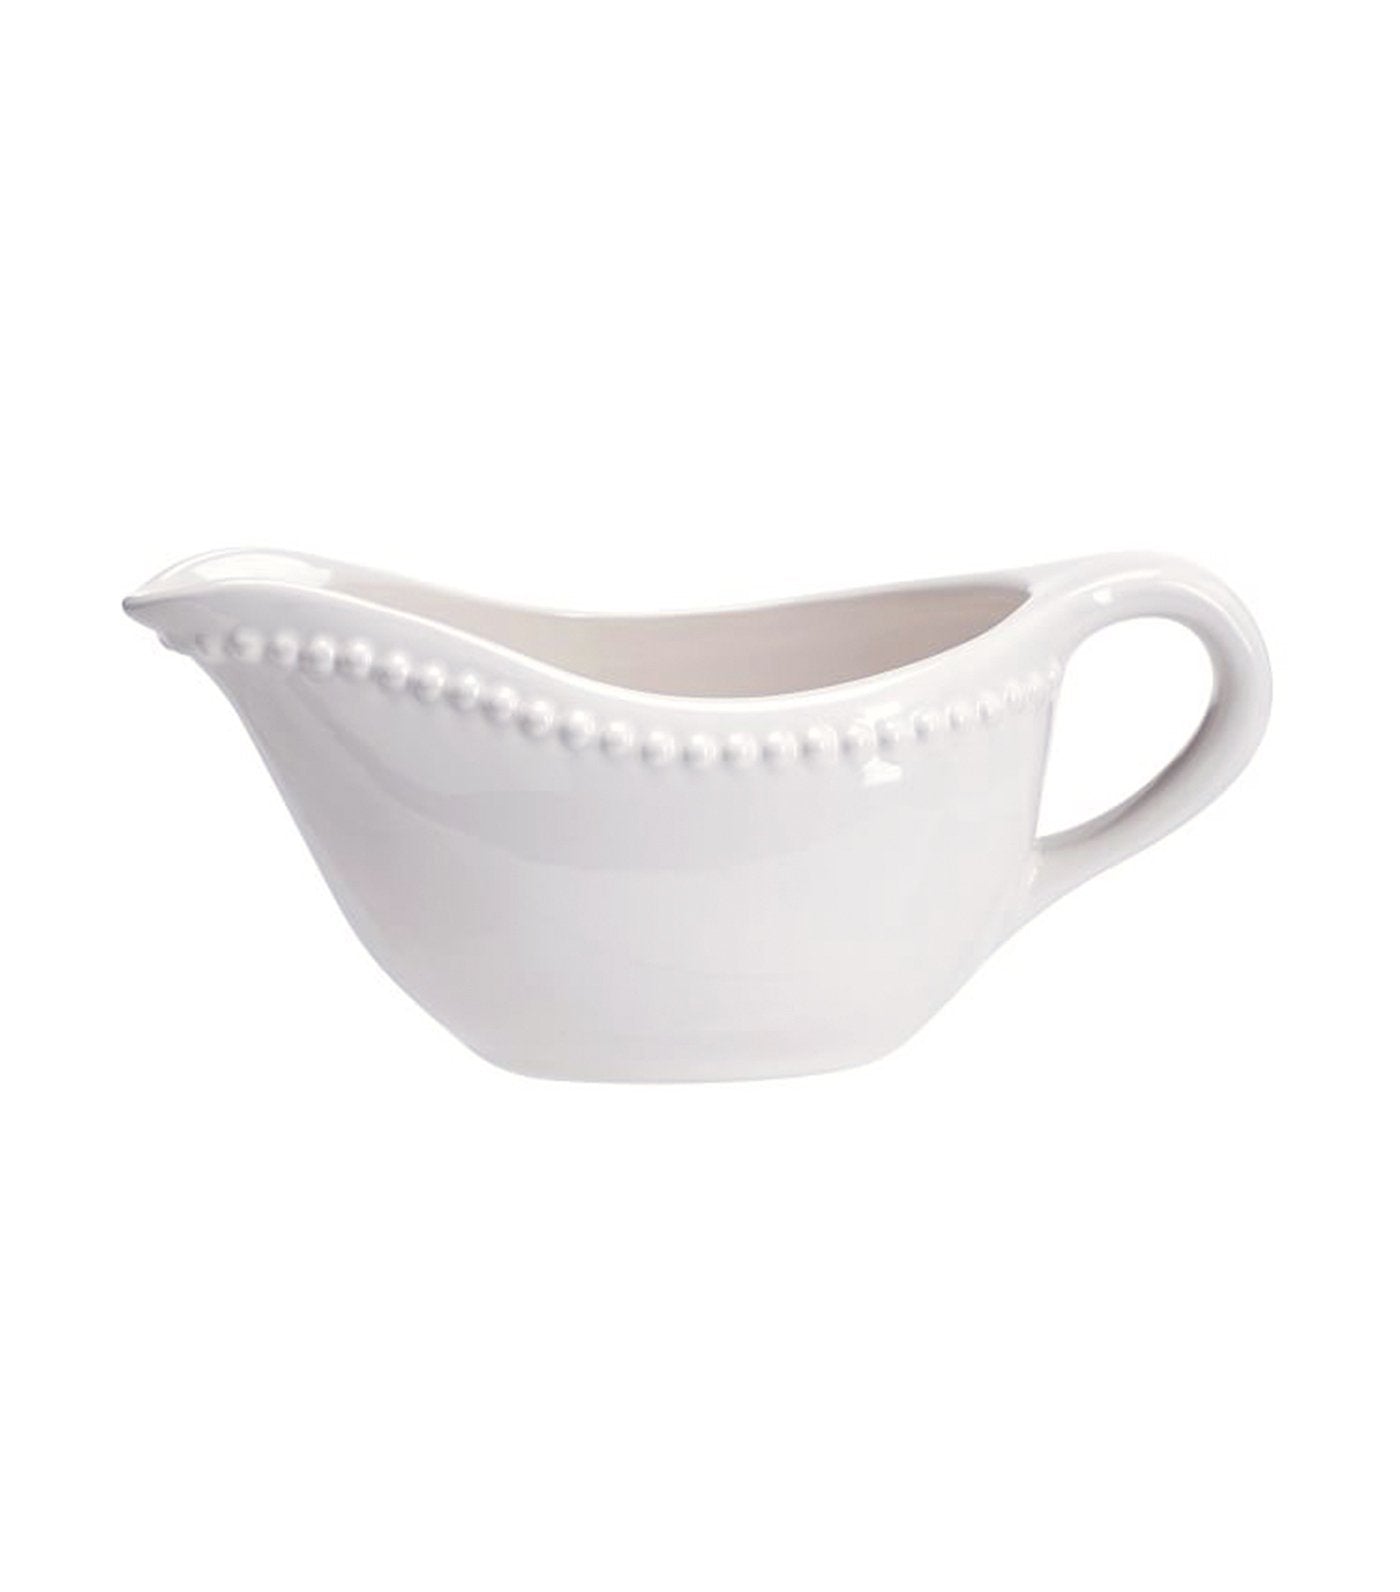 pottery barn emma stoneware beaded collection - white